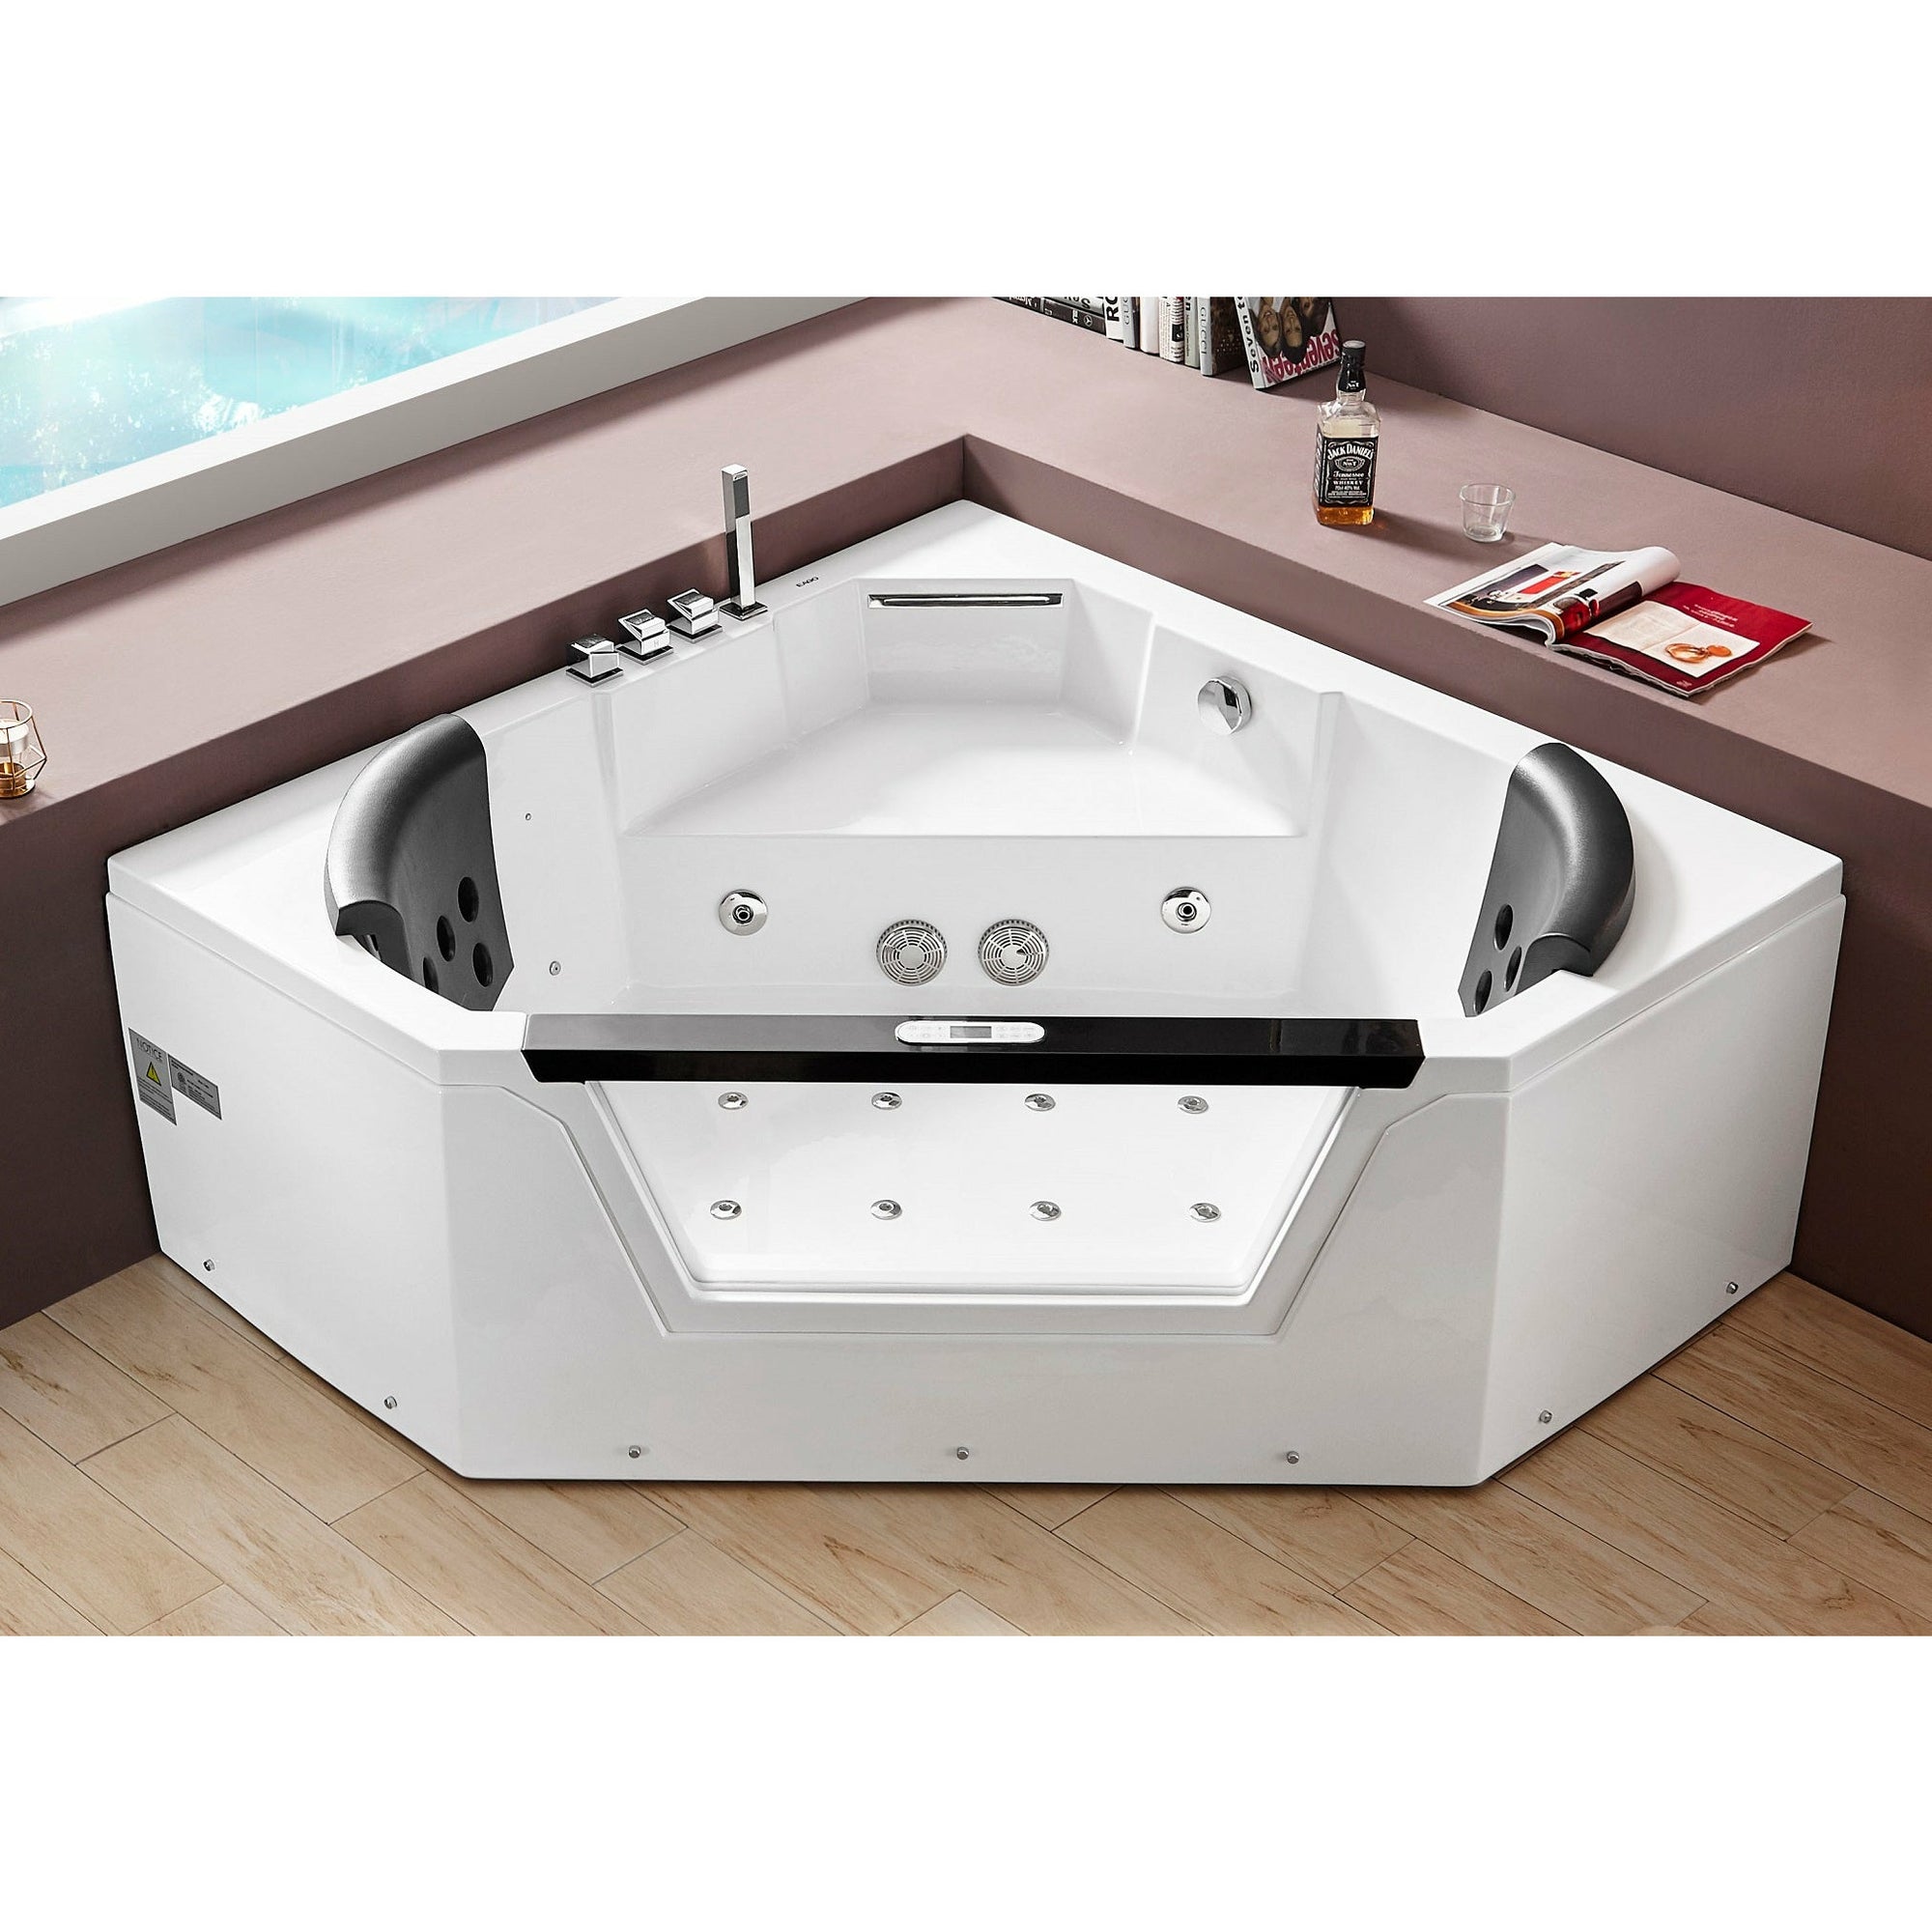 EAGO AM156ETL 5 ft Clear Corner Acrylic Whirlpool Bathtub for Two - tempered glass front panel, fiberglass and stainless steel-reinforced MaxLoad™ high gloss acrylic with Keypad Control Panel, jets and square shaped hand held shower head front view in a white background